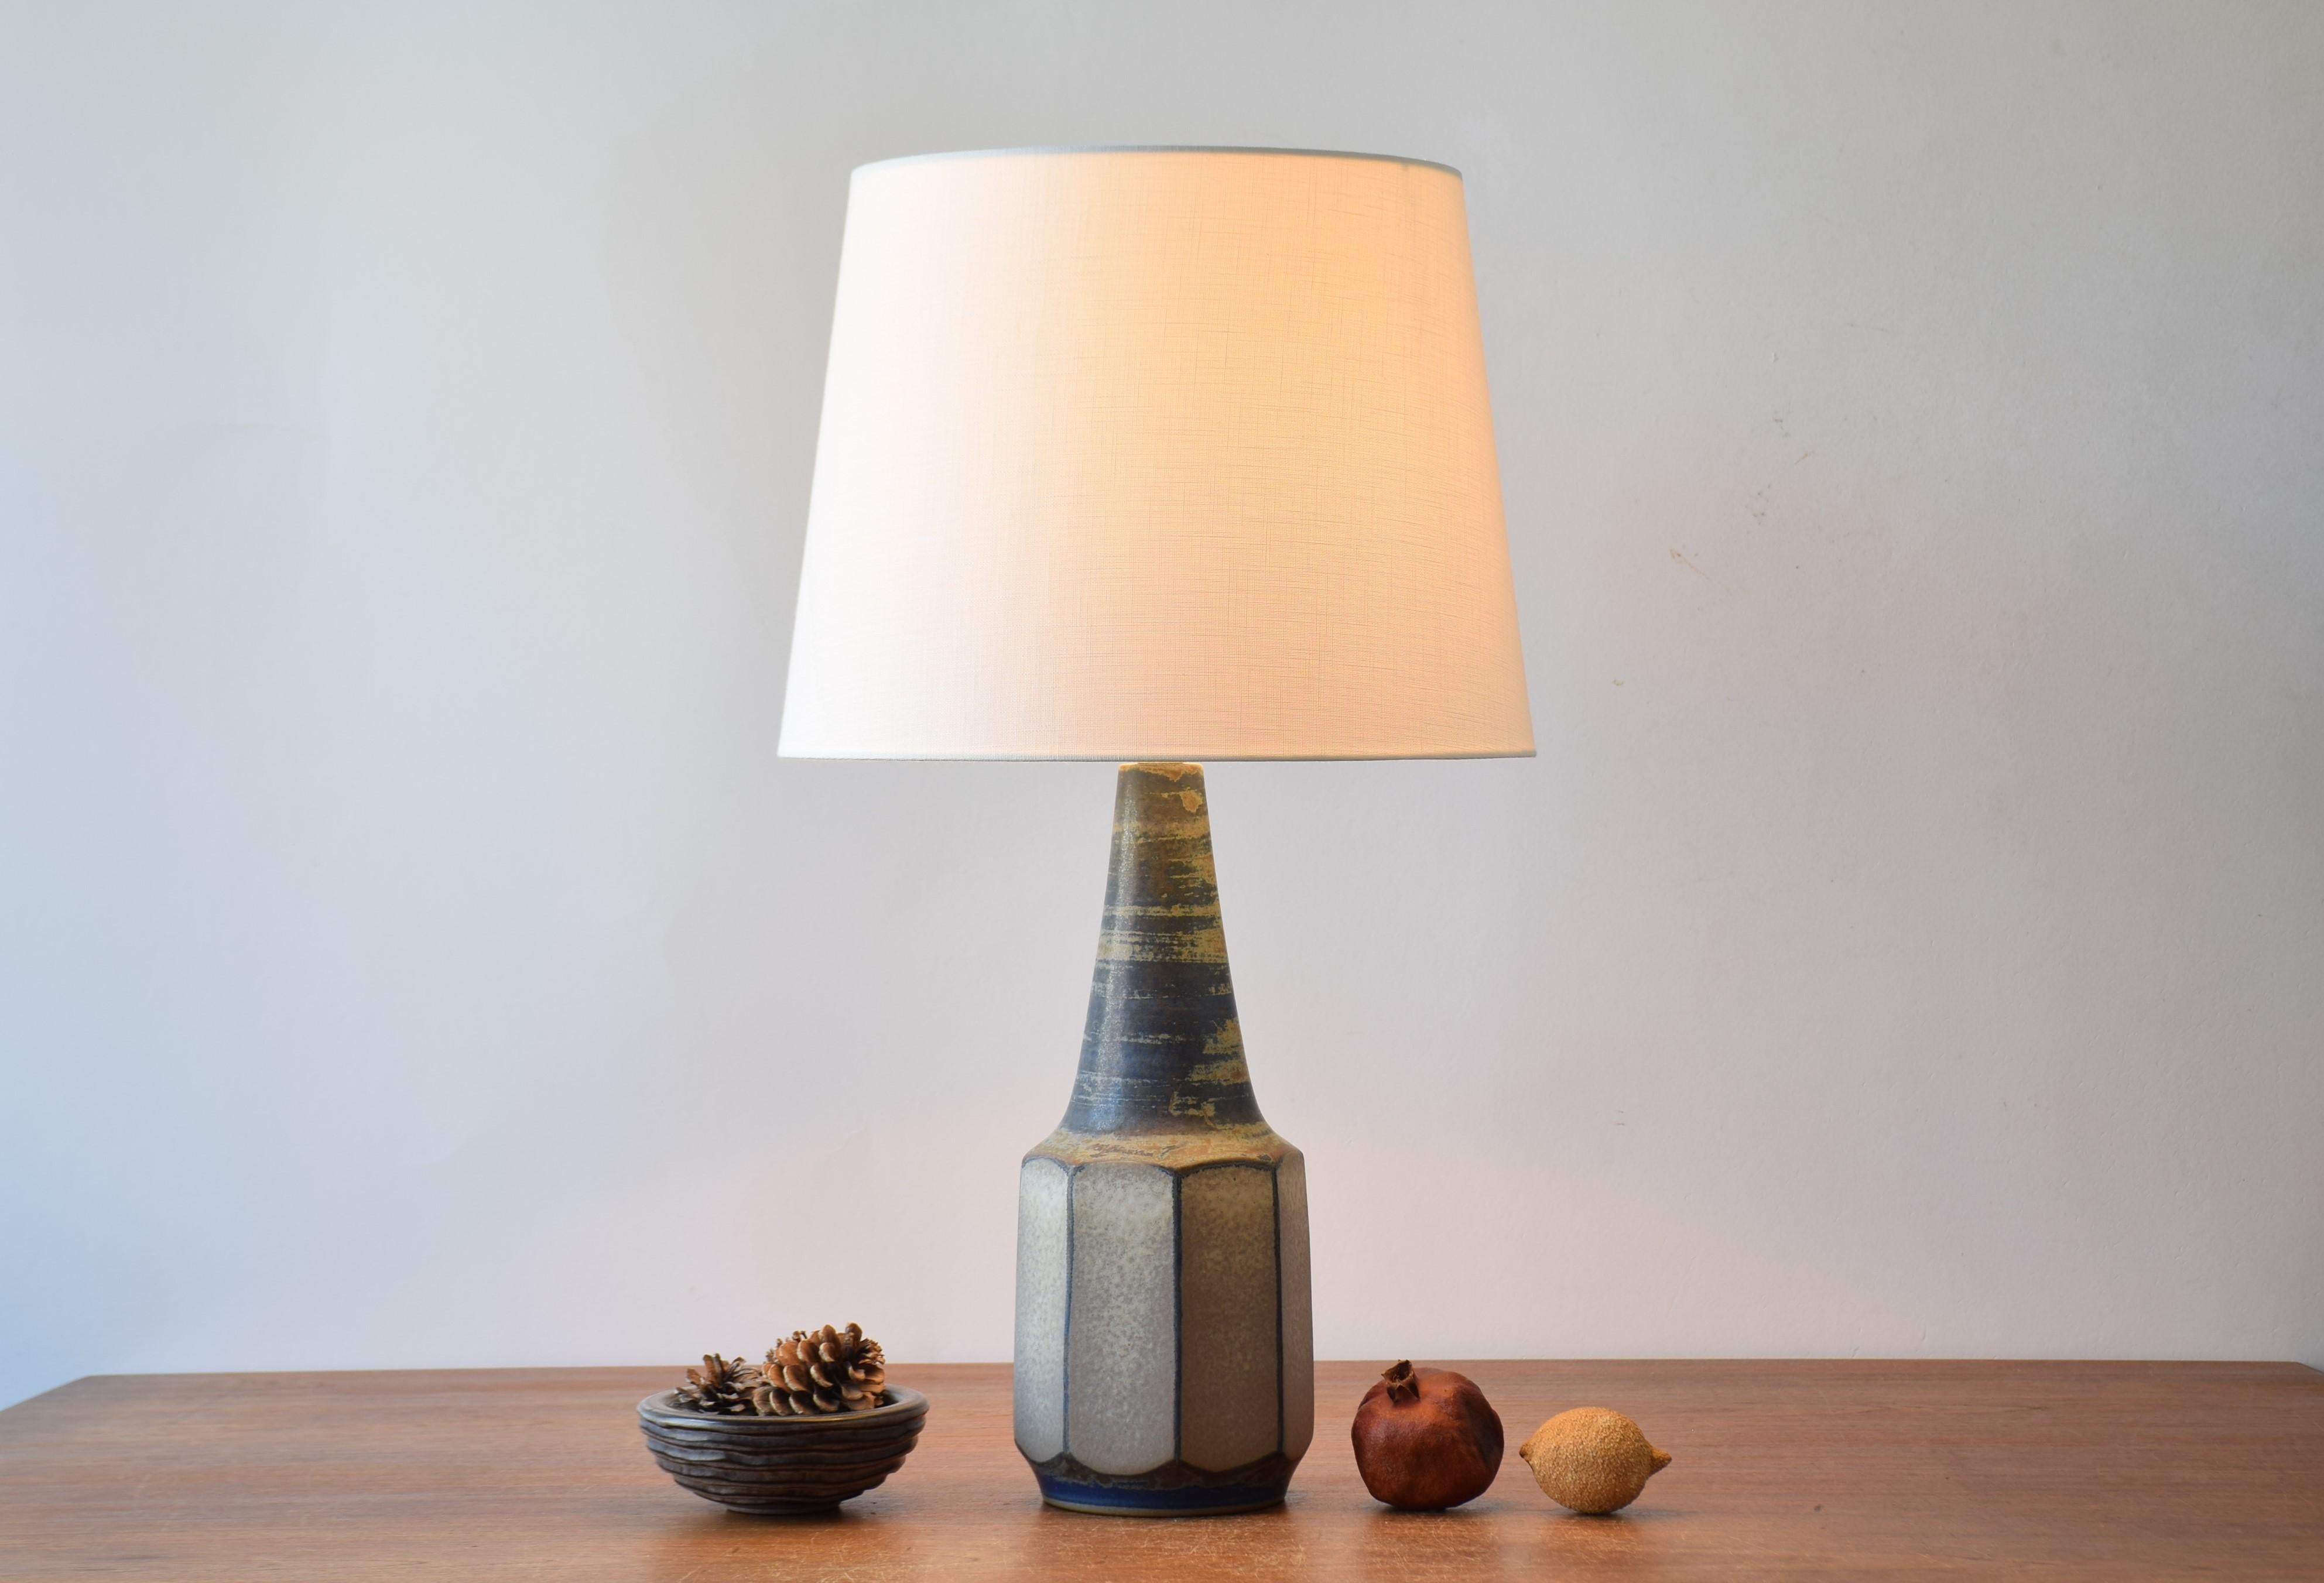 Stylish Midcentury Danish table lamp by Marianne Starck for the ceramic workshop of Michael Andersen & Søn (Michael Andersen & Son) on the Danish island Bornholm. Designed and made ca 1960s.
The lampbase is made of stoneware with a matte blue and